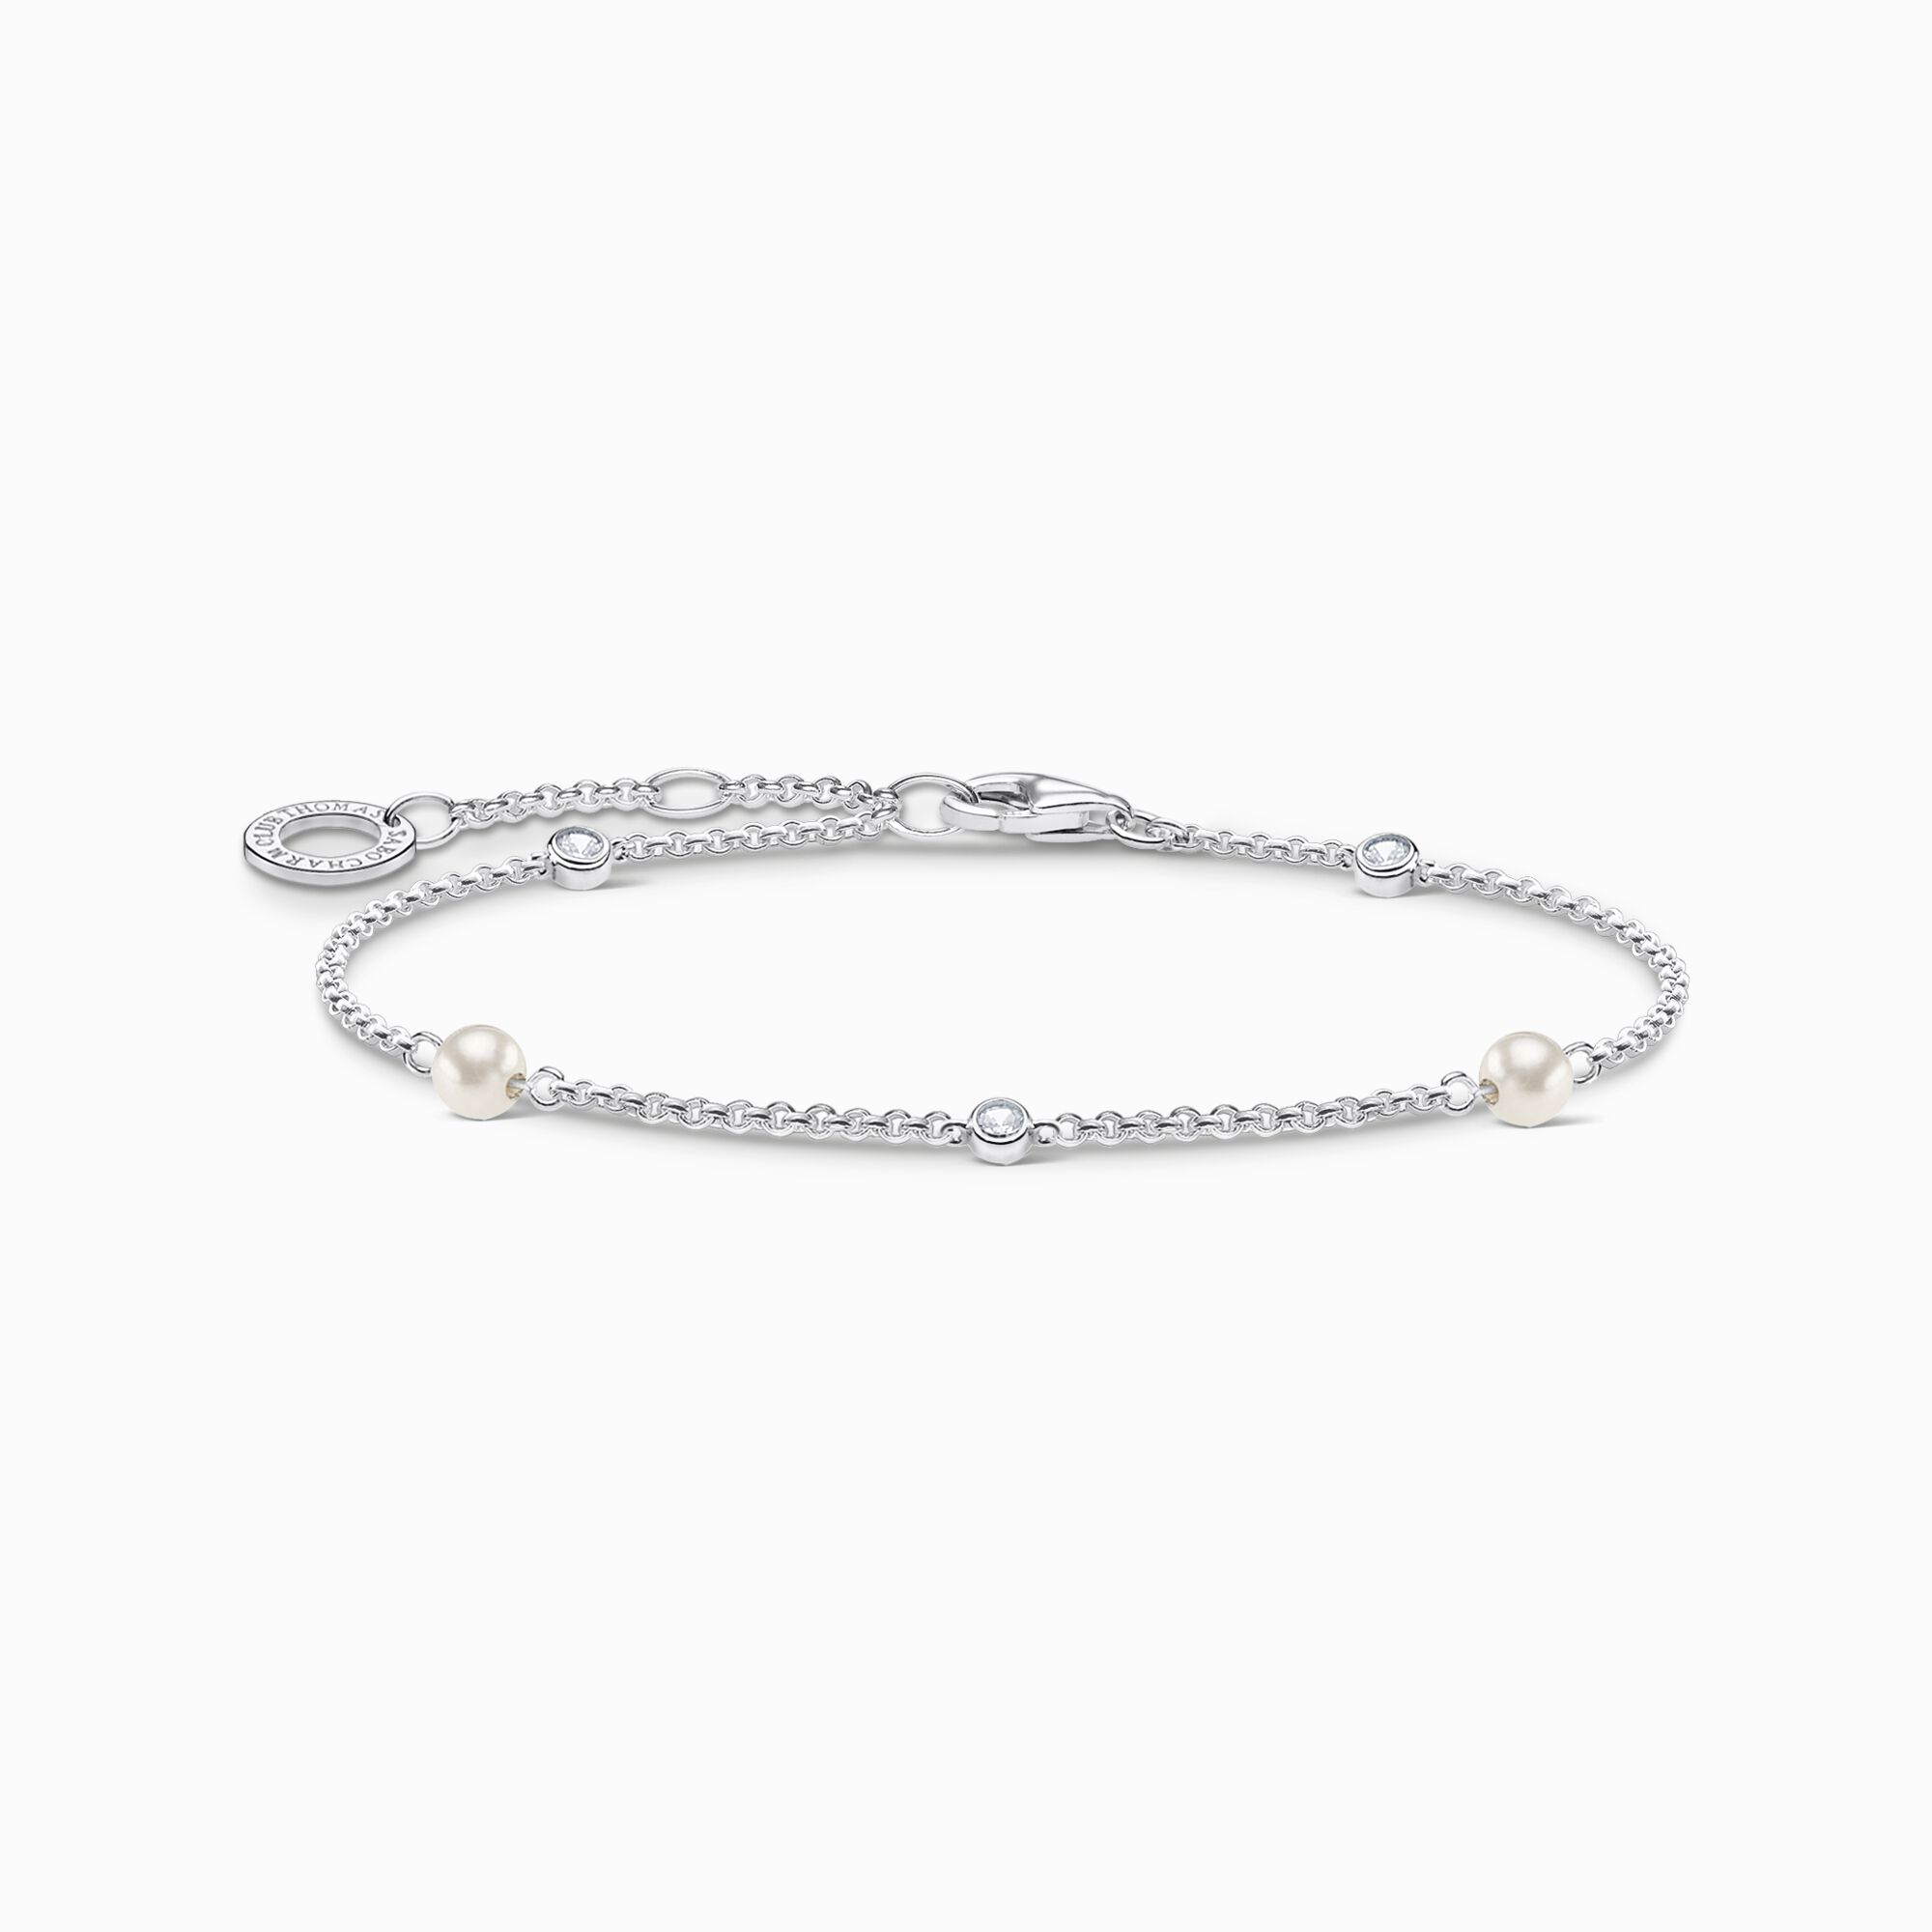 Bracelet white stones from the Charming Collection collection in the THOMAS SABO online store